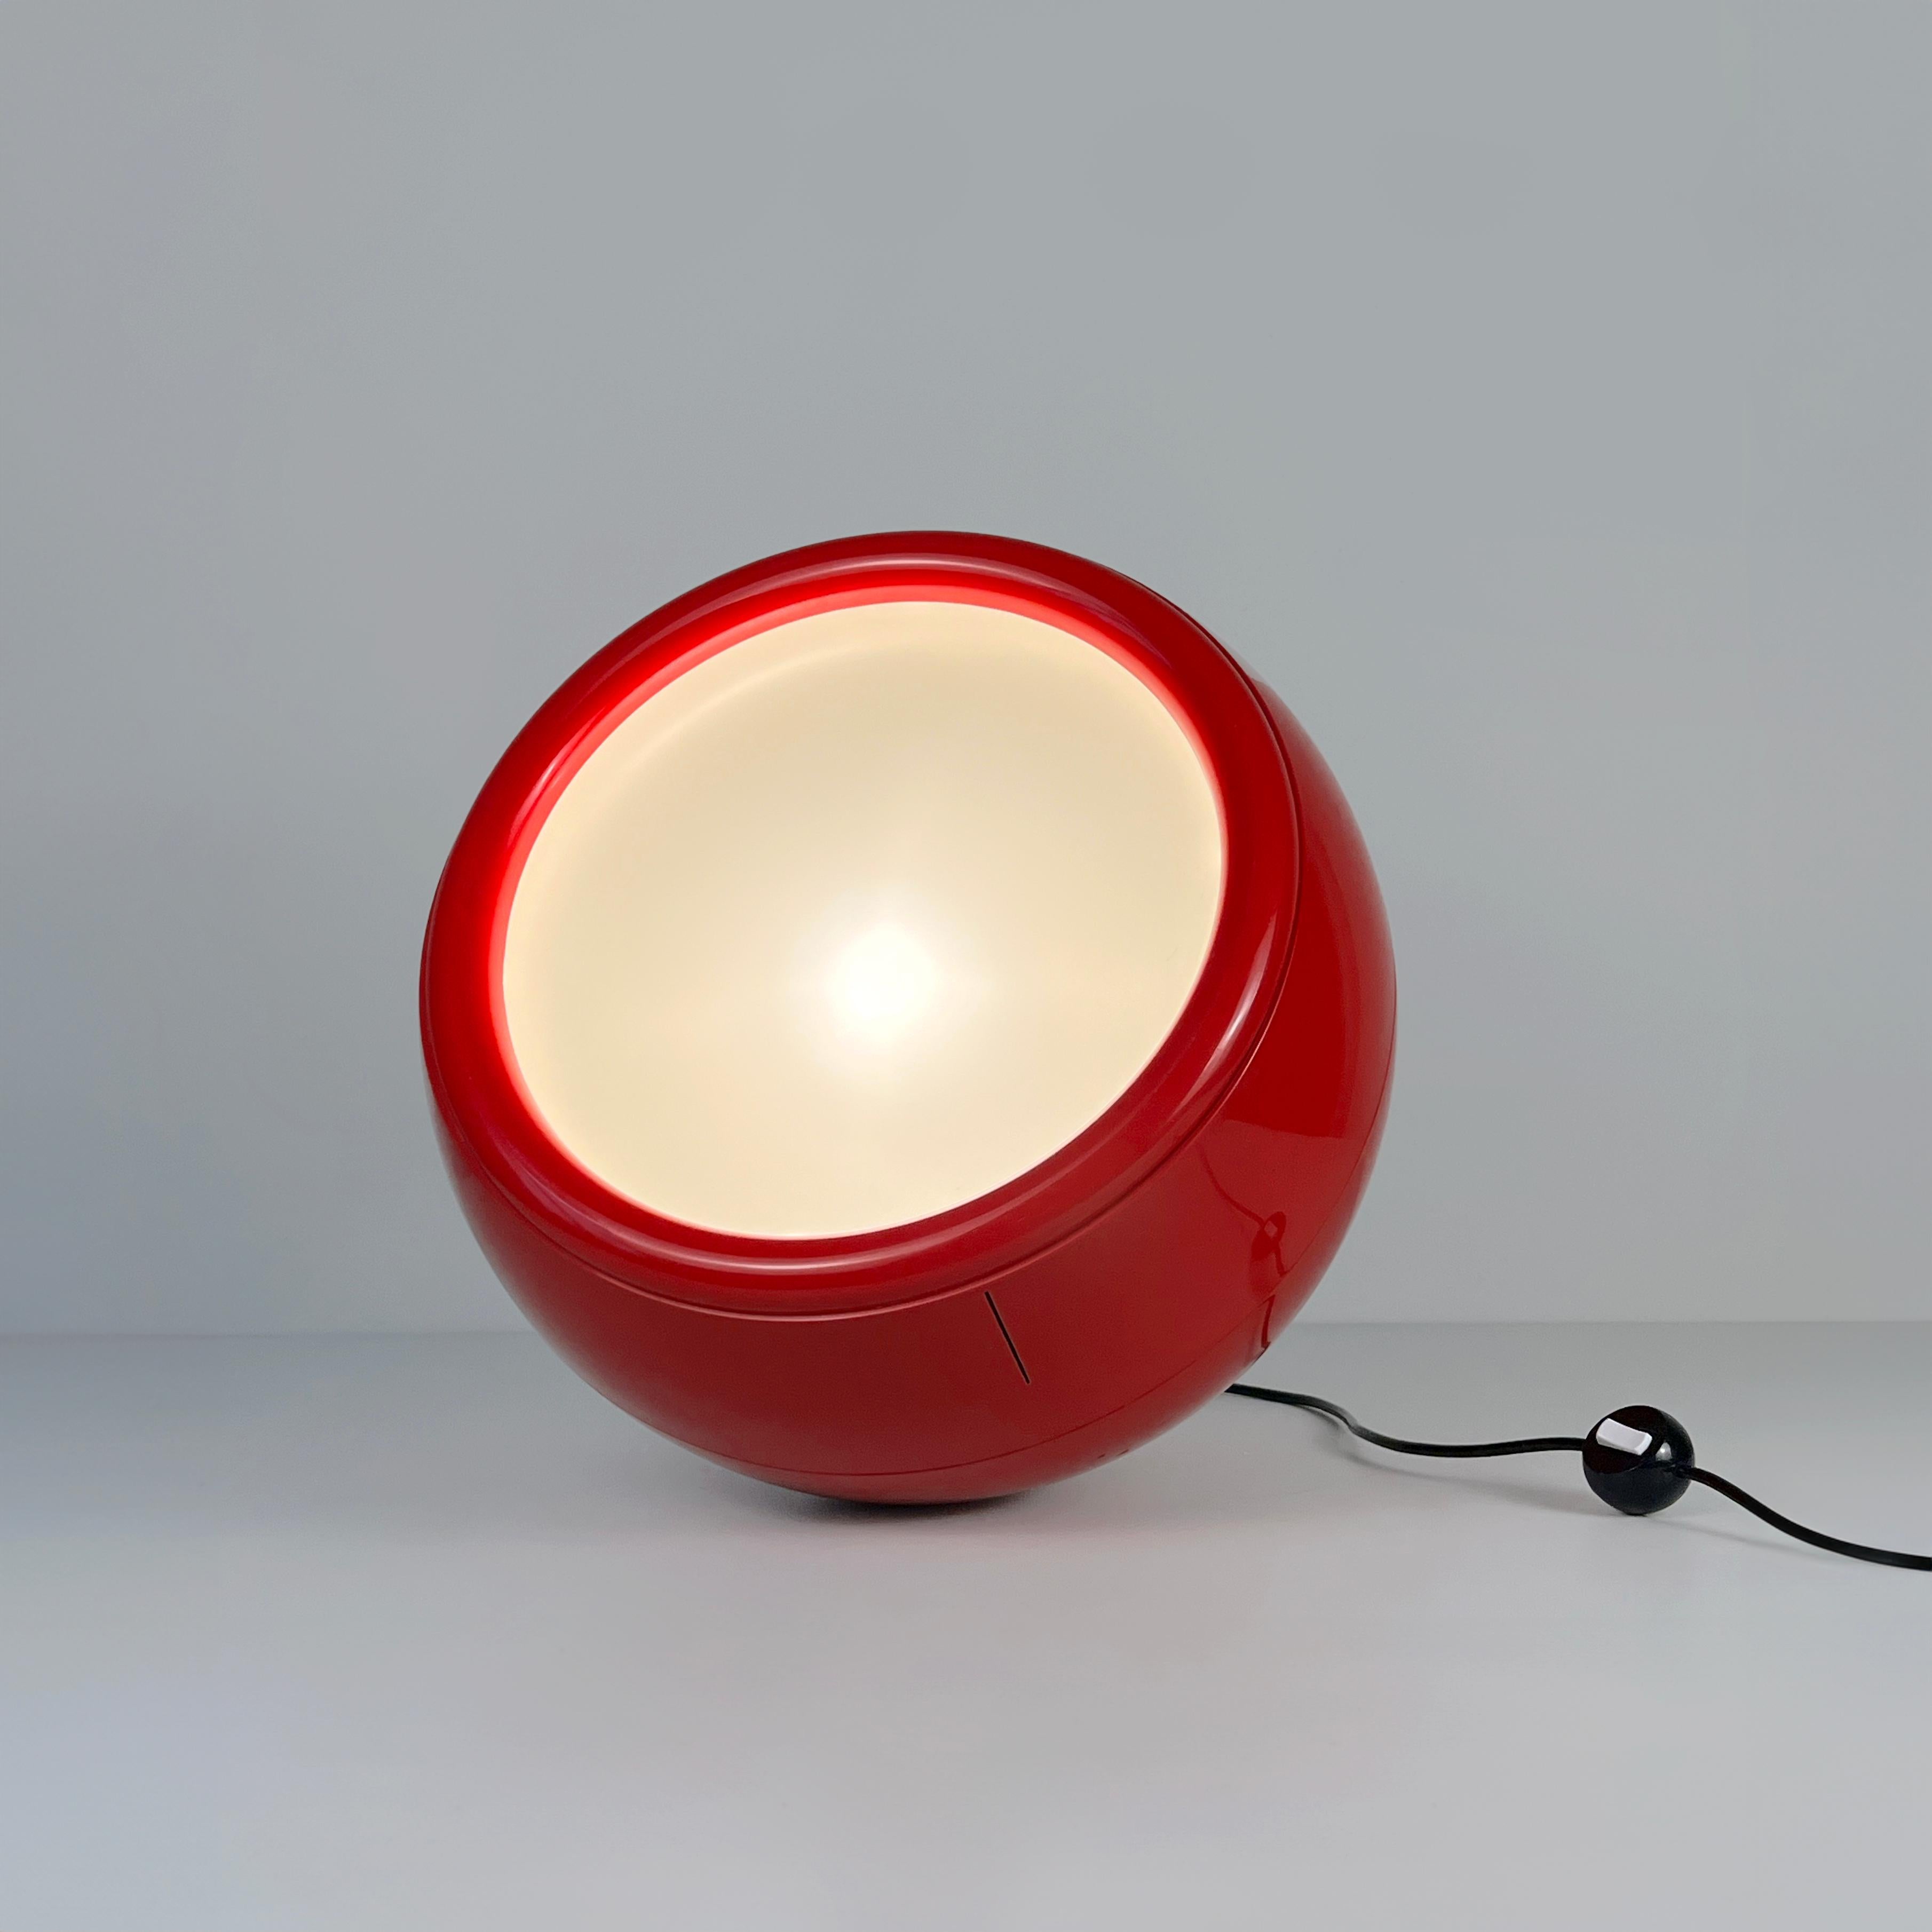 Red Pallade (1st Ed. 1968) floor lamp designed by Studio Tetrarch for Artemide For Sale 11